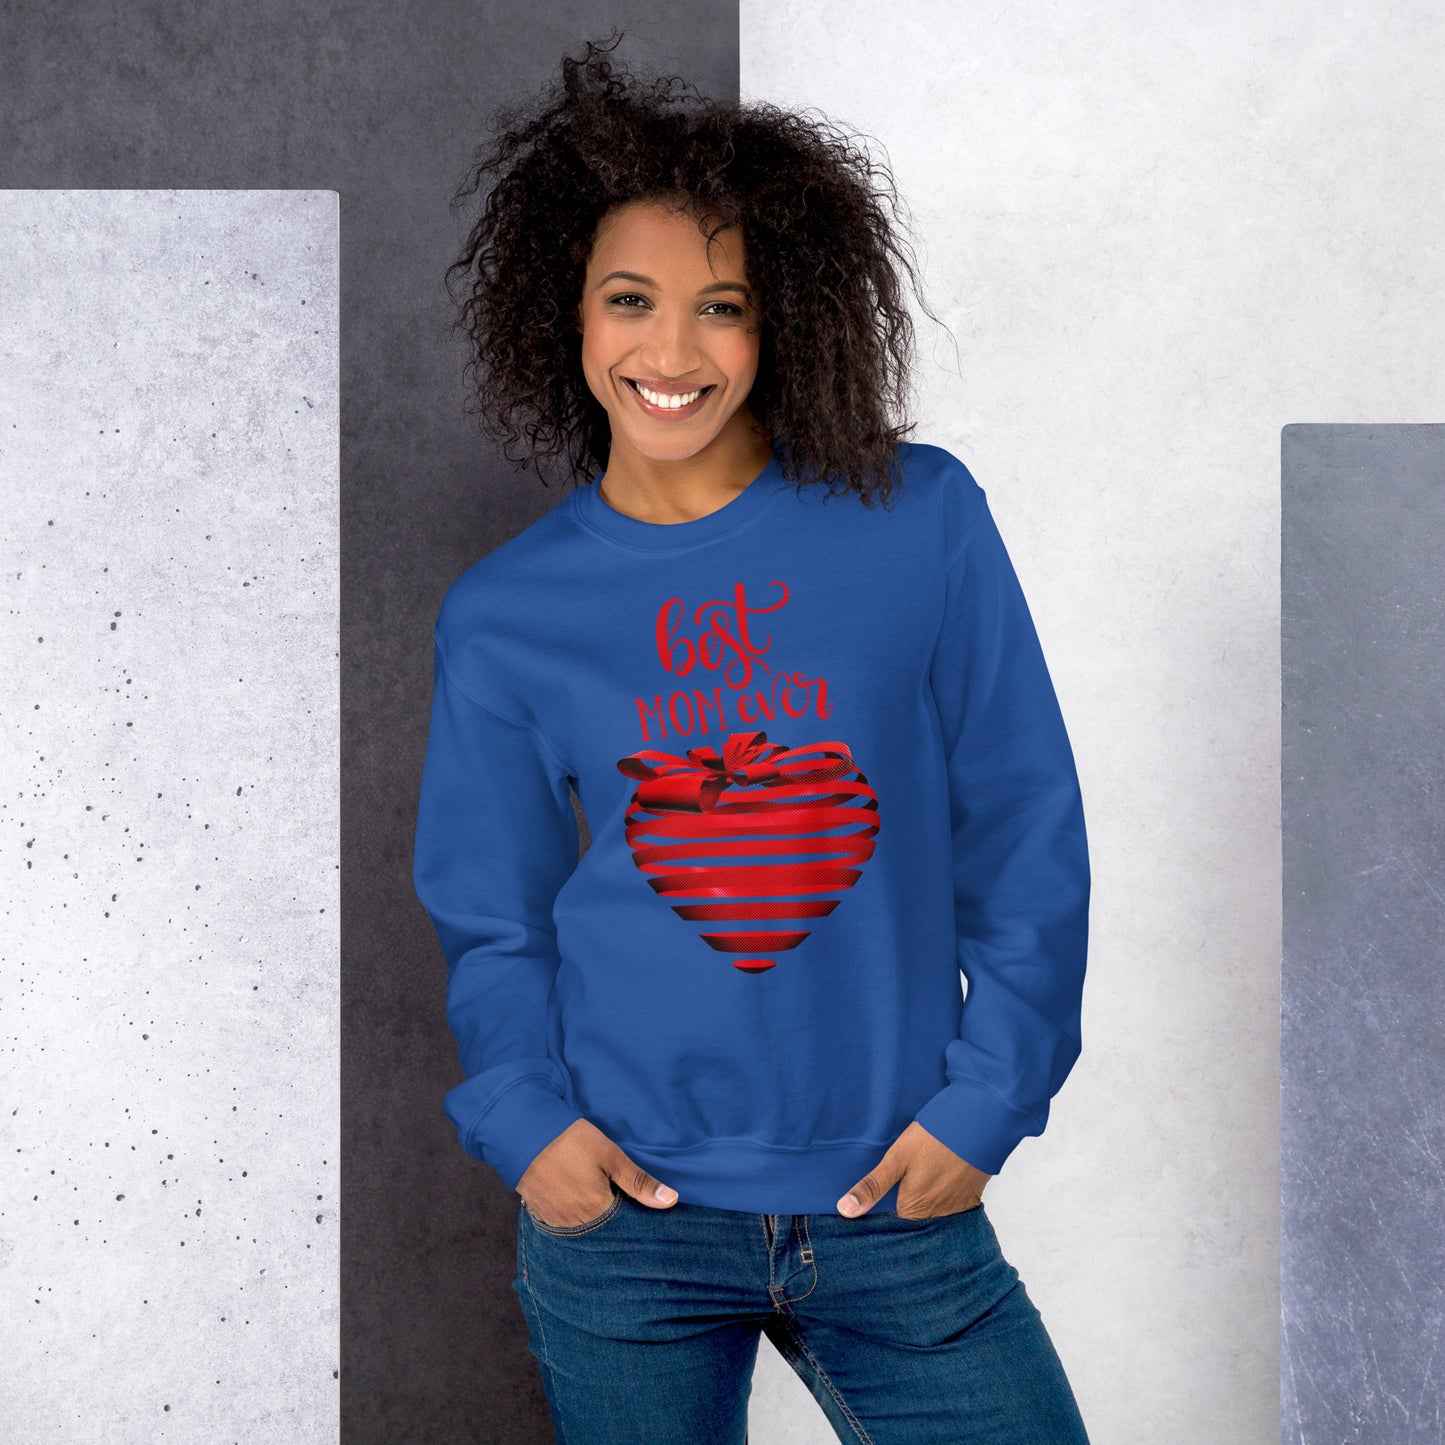 Women with royal blue sweater with red text best MOM Ever and red heart